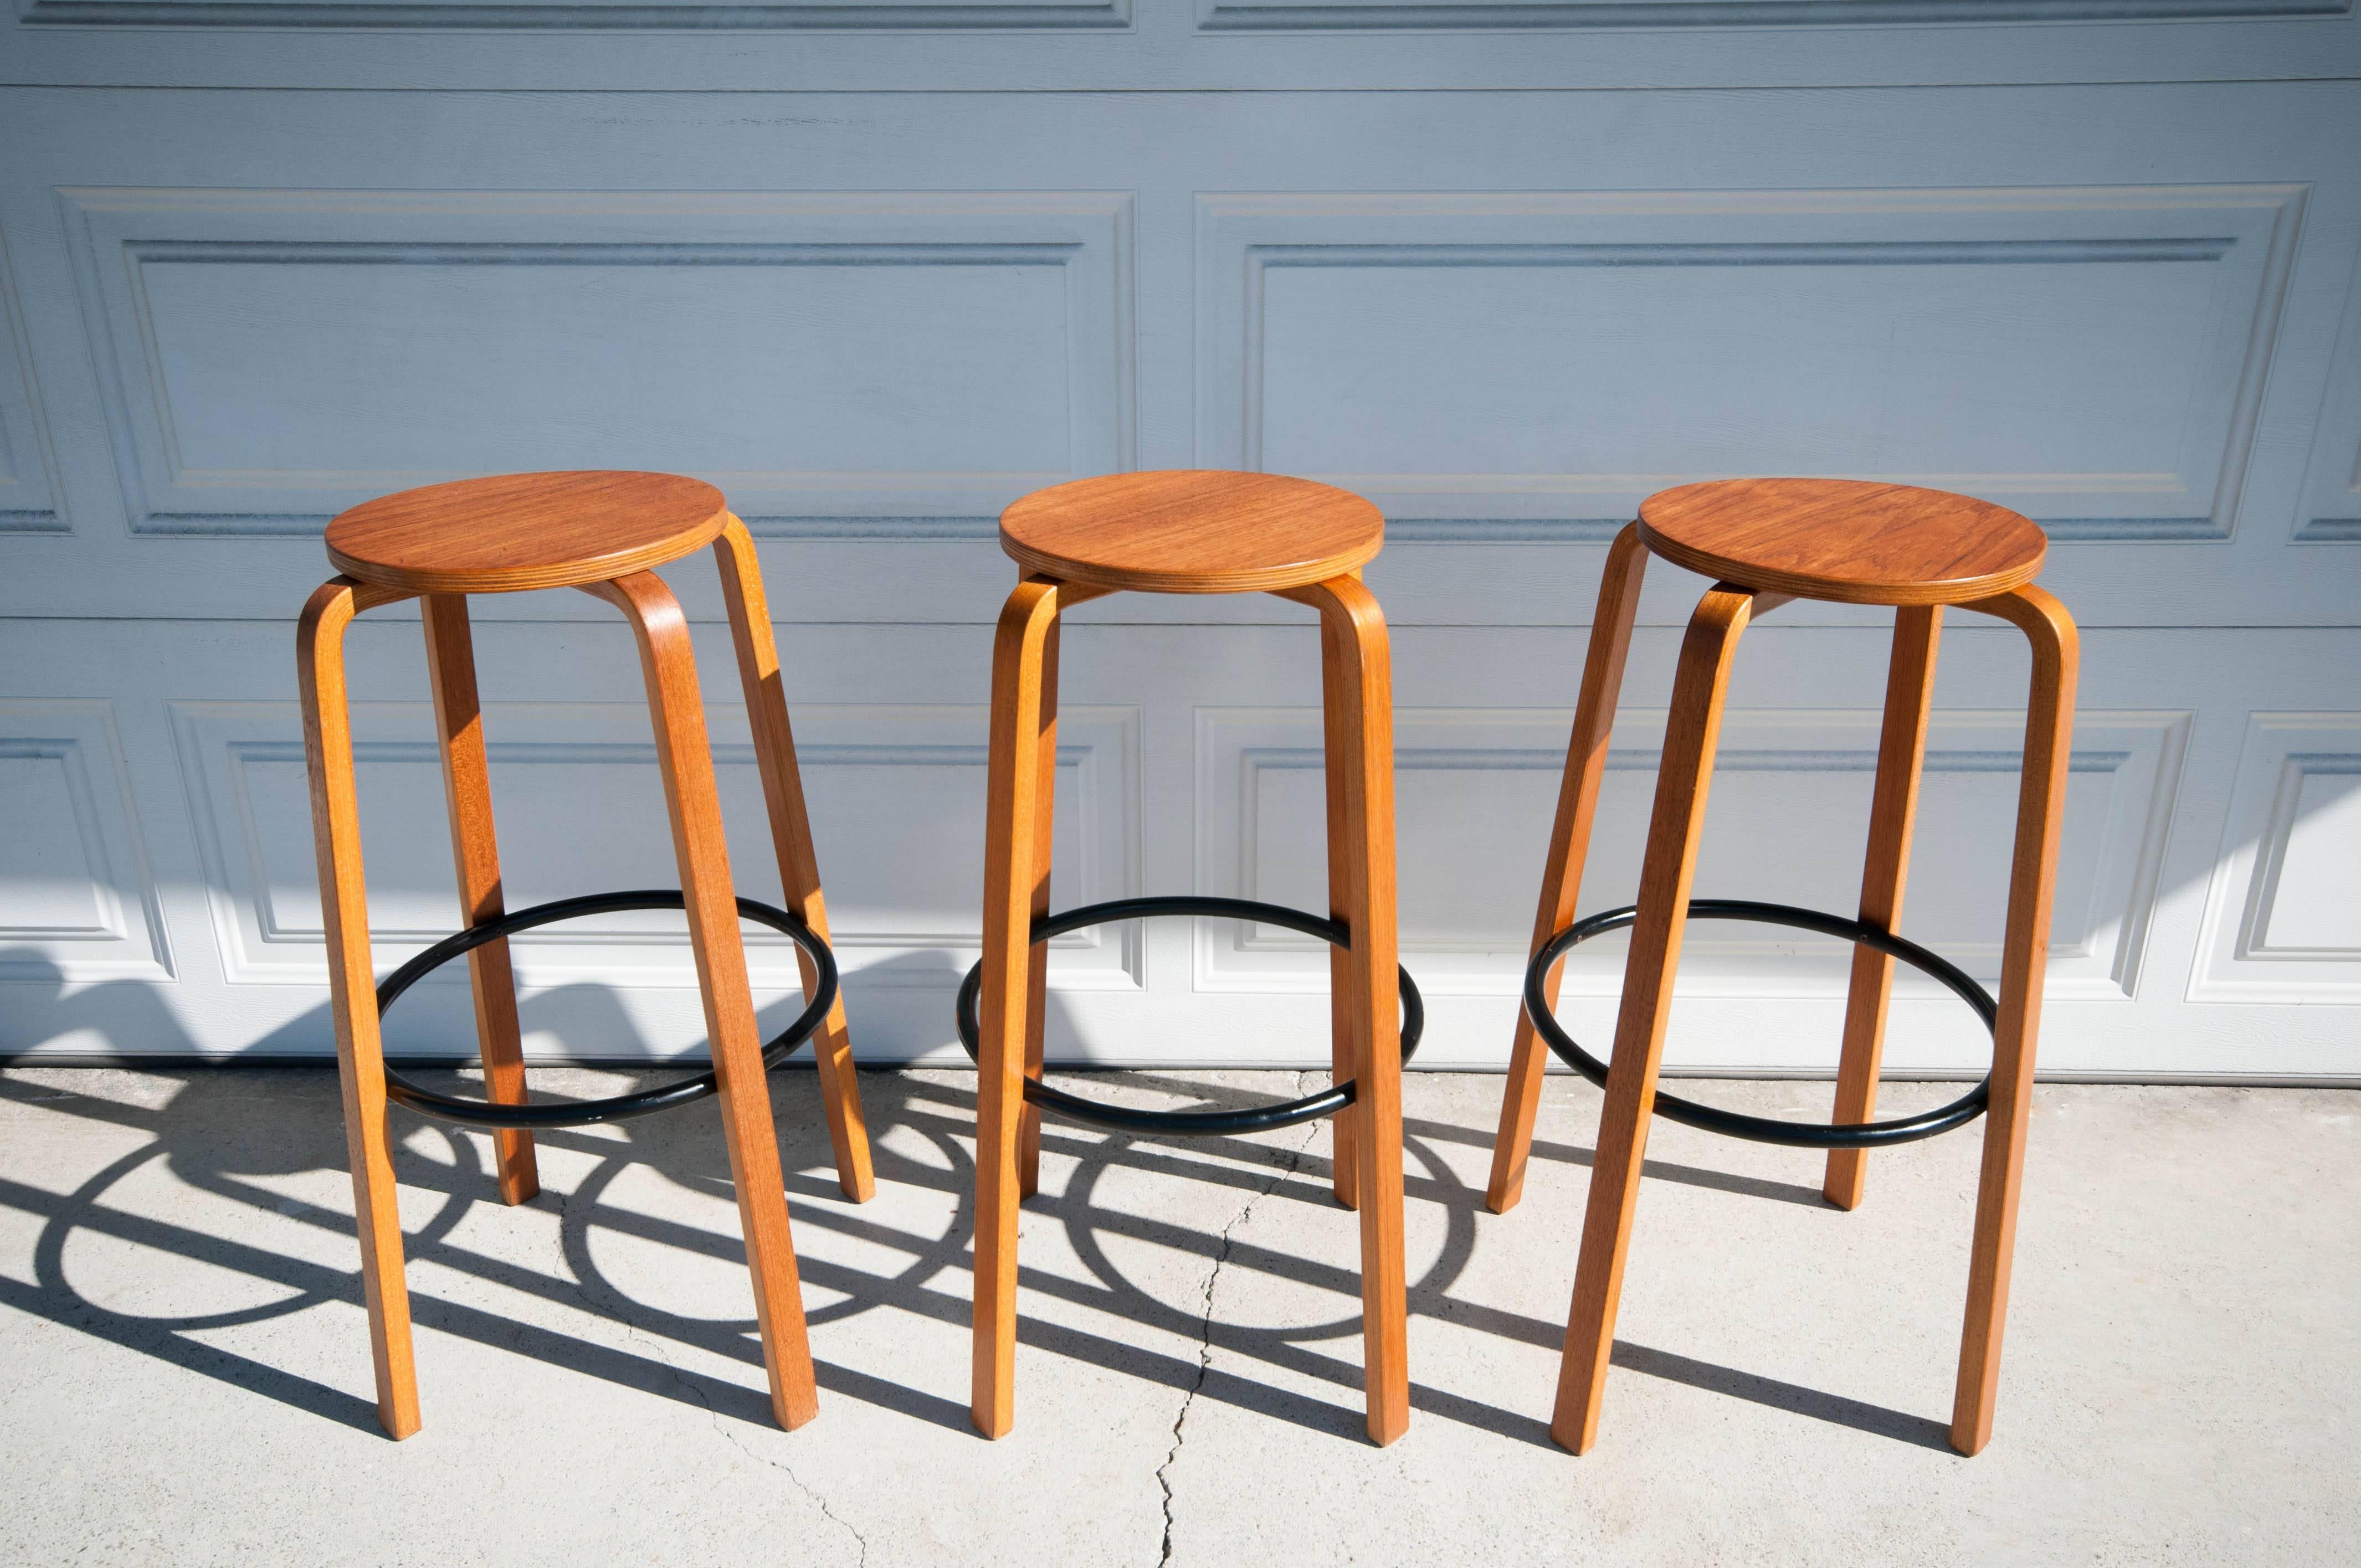 Mid Century Modern Bar Stools in teak and birch bentwood. This set of three stools are in the style of Alvar Aalto and are marked made in Denmark. Price is for the set of three bar stools. 

Seat: 12